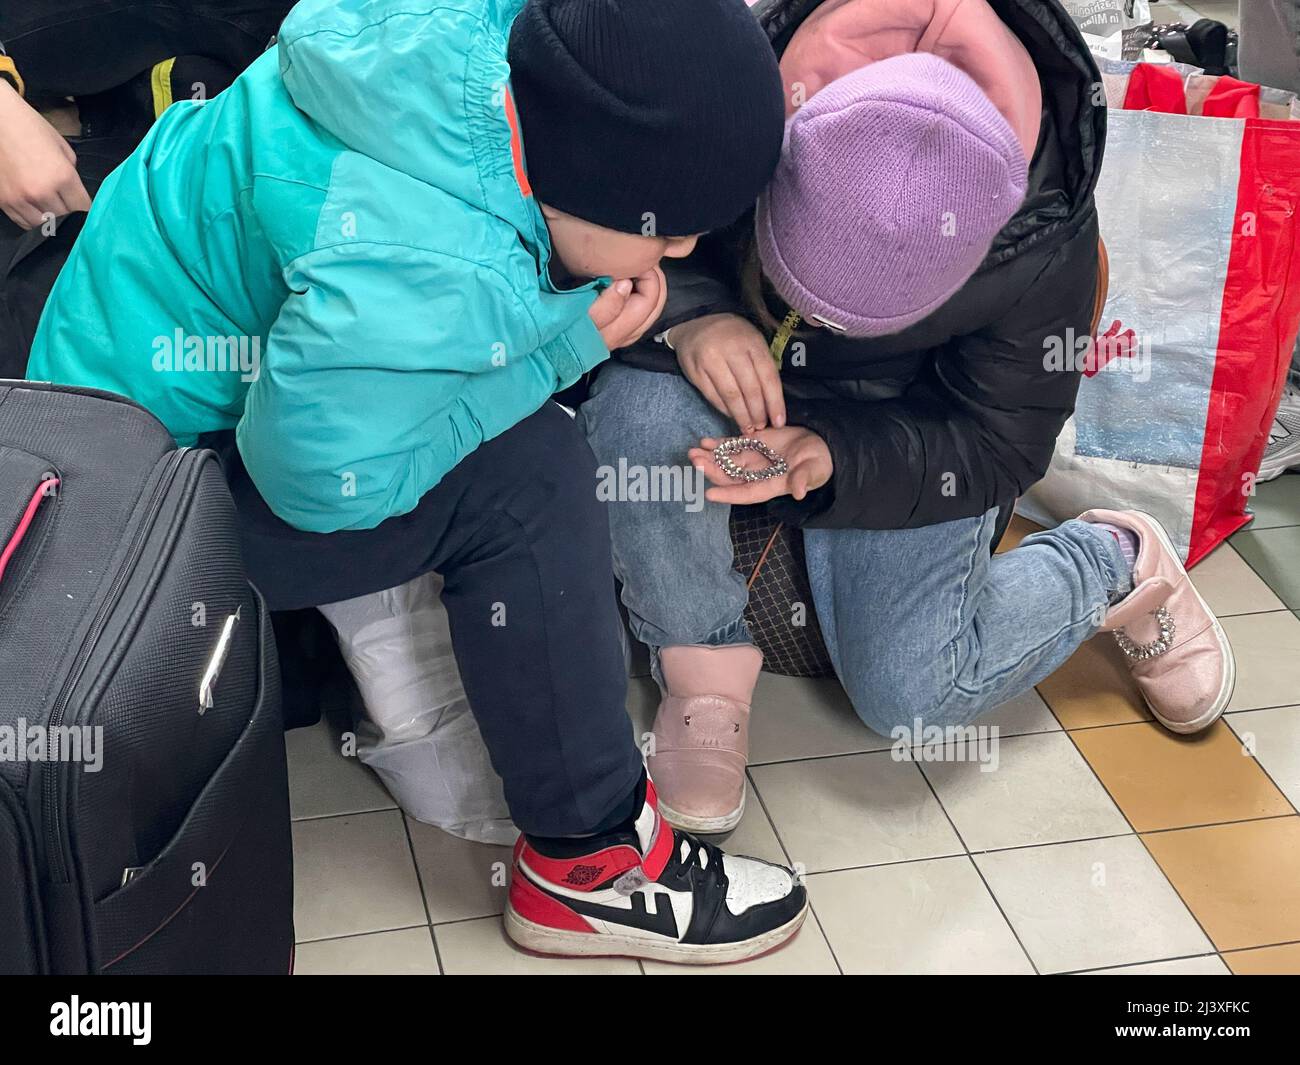 Przemysl, Poland. 9th Apr, 2022. Kids looking at a found treasure on a very cold and rainy day. Ukrainian refugees at Przemysl train station, the railway entry point into Poland closest to the border ''” the Ukrainian city of Lviv is less than 100 KM away ''” is teeming with people fleeing Russia's war on them, trying to board trains to safer places. (Credit Image: © Amy Katz/ZUMA Press Wire) Stock Photo